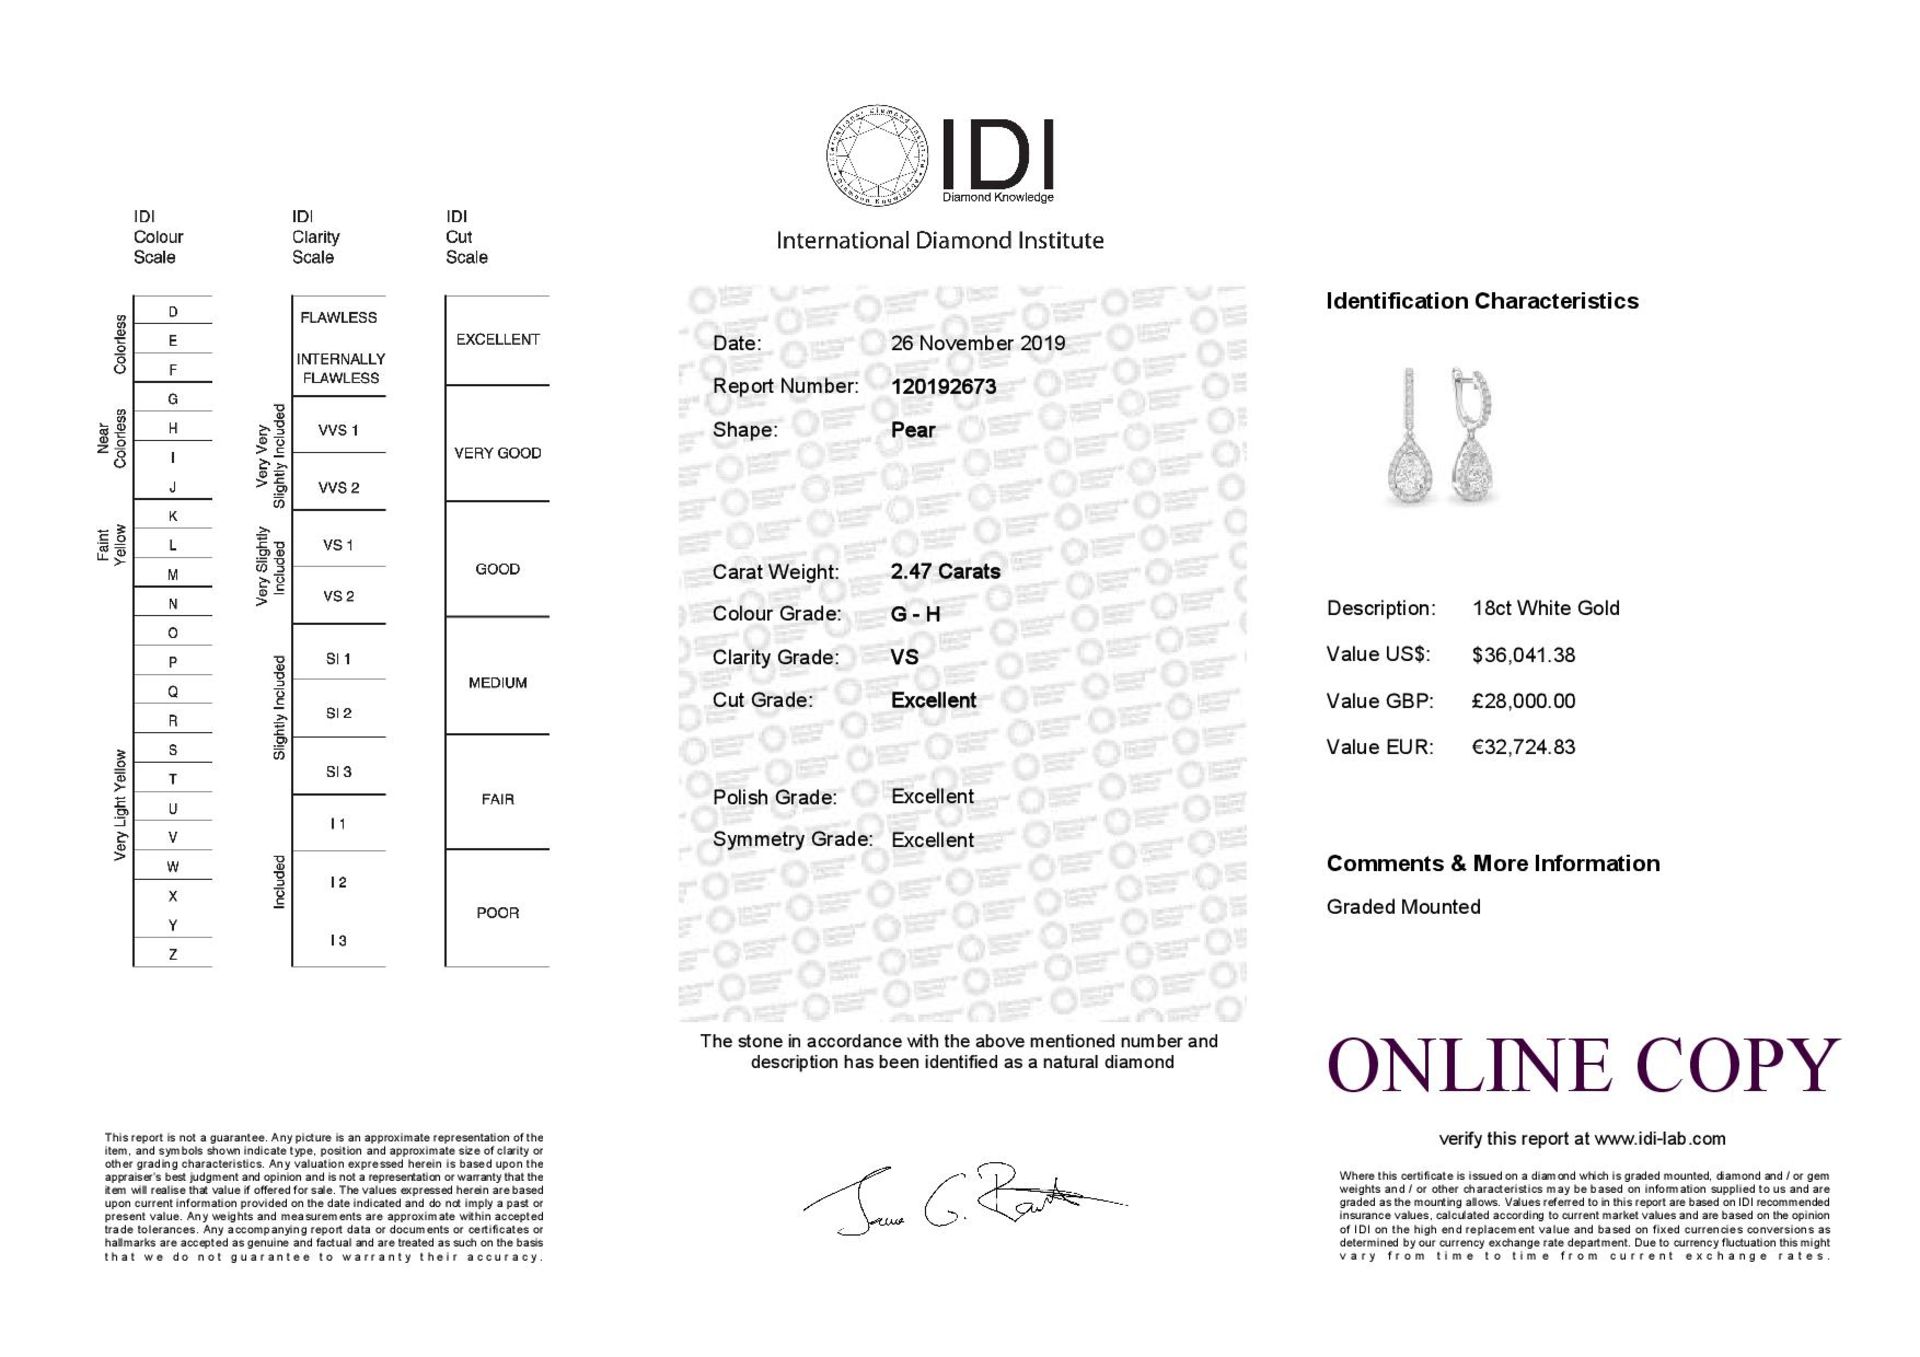 18ct White Gold Pear Shape Halo Drop Earring (2.05) 2.47 Carats - Valued by IDI £28,000.00 - Two - Image 3 of 3